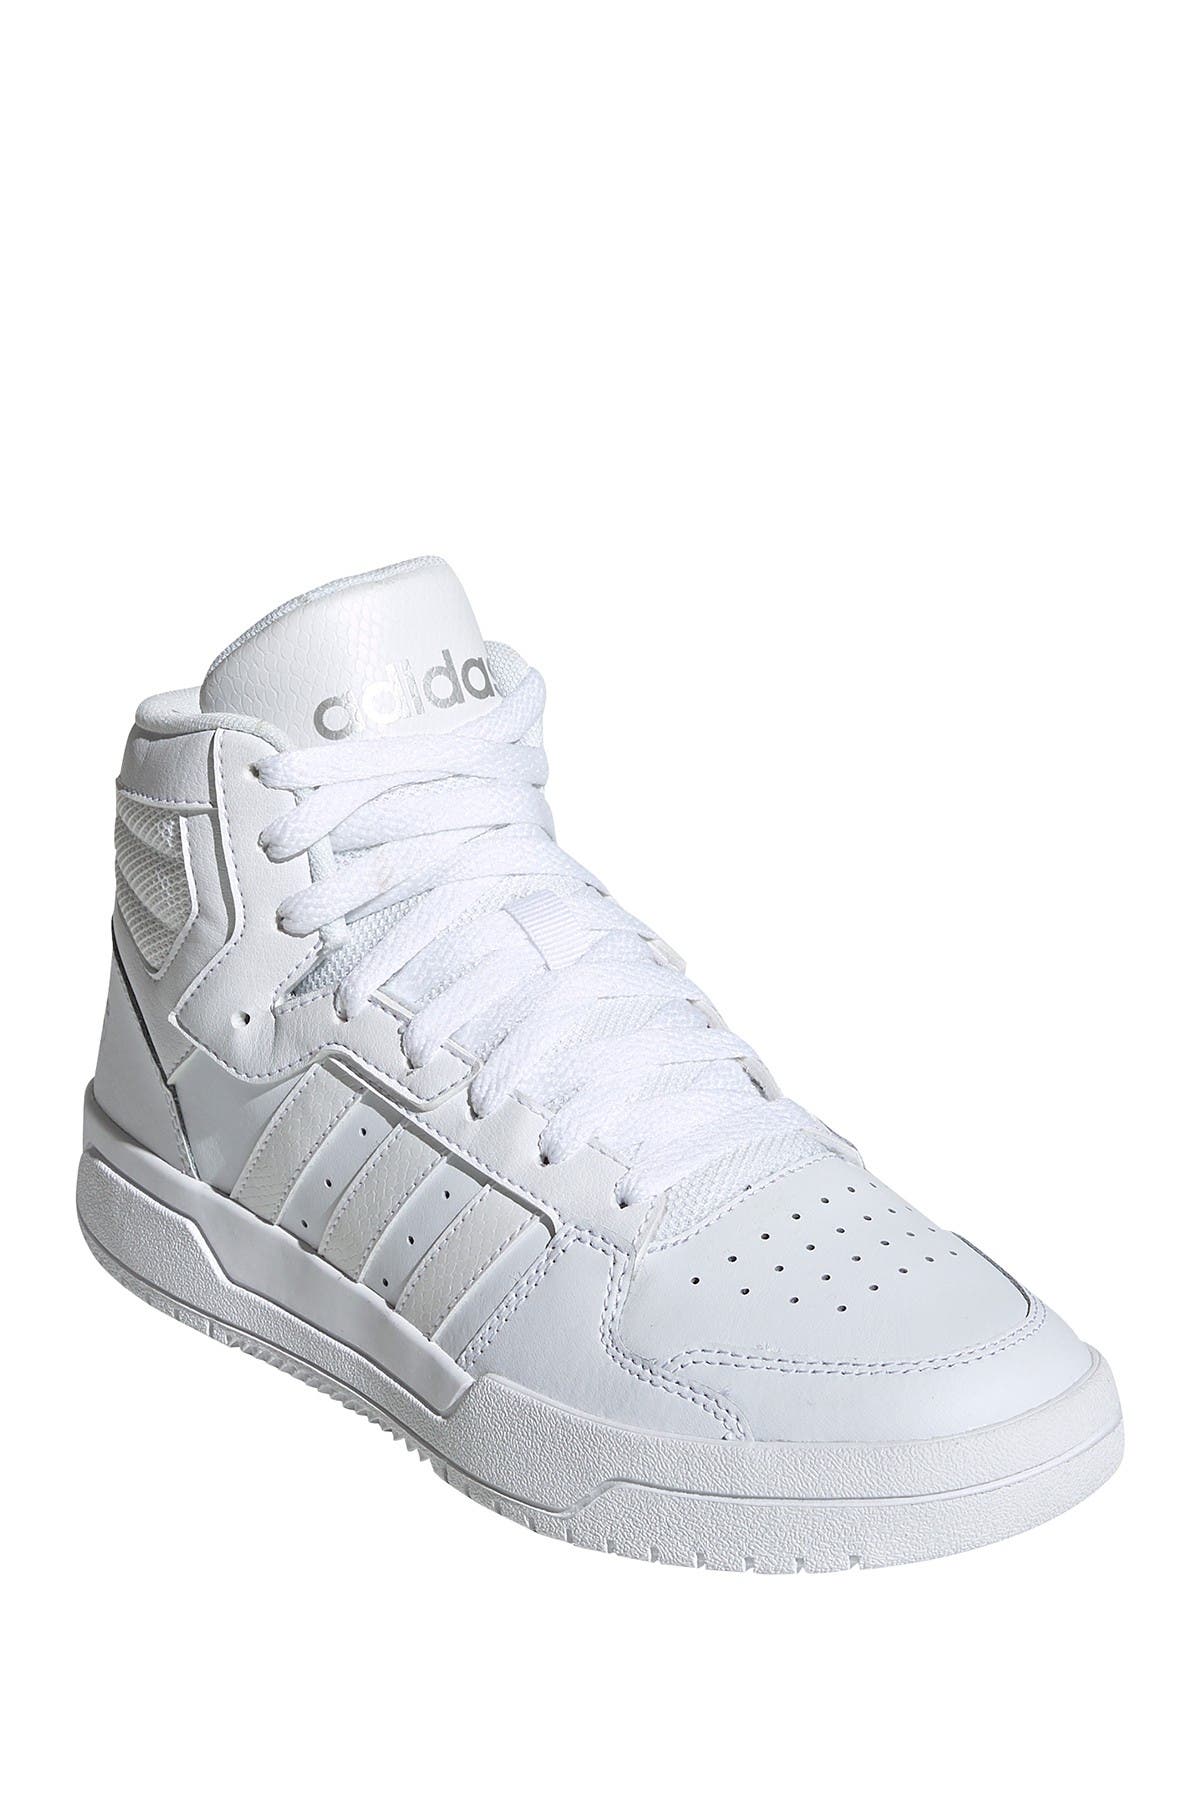 adidas entrap mid shoes womens